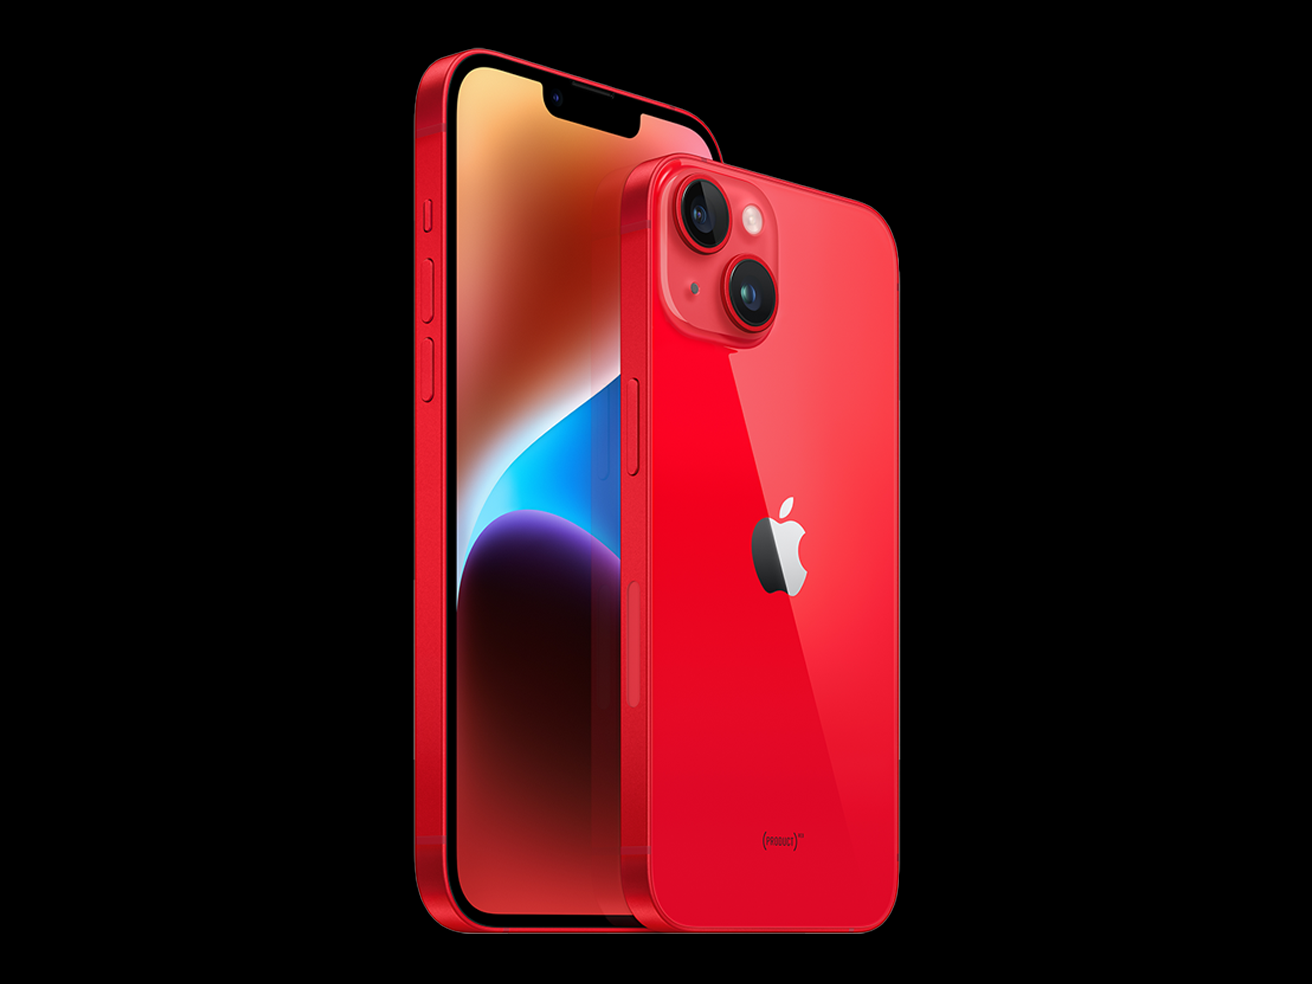 Red is a first for iPhones - Apple launches Red colour special-edition  iPhone: 5 things to know